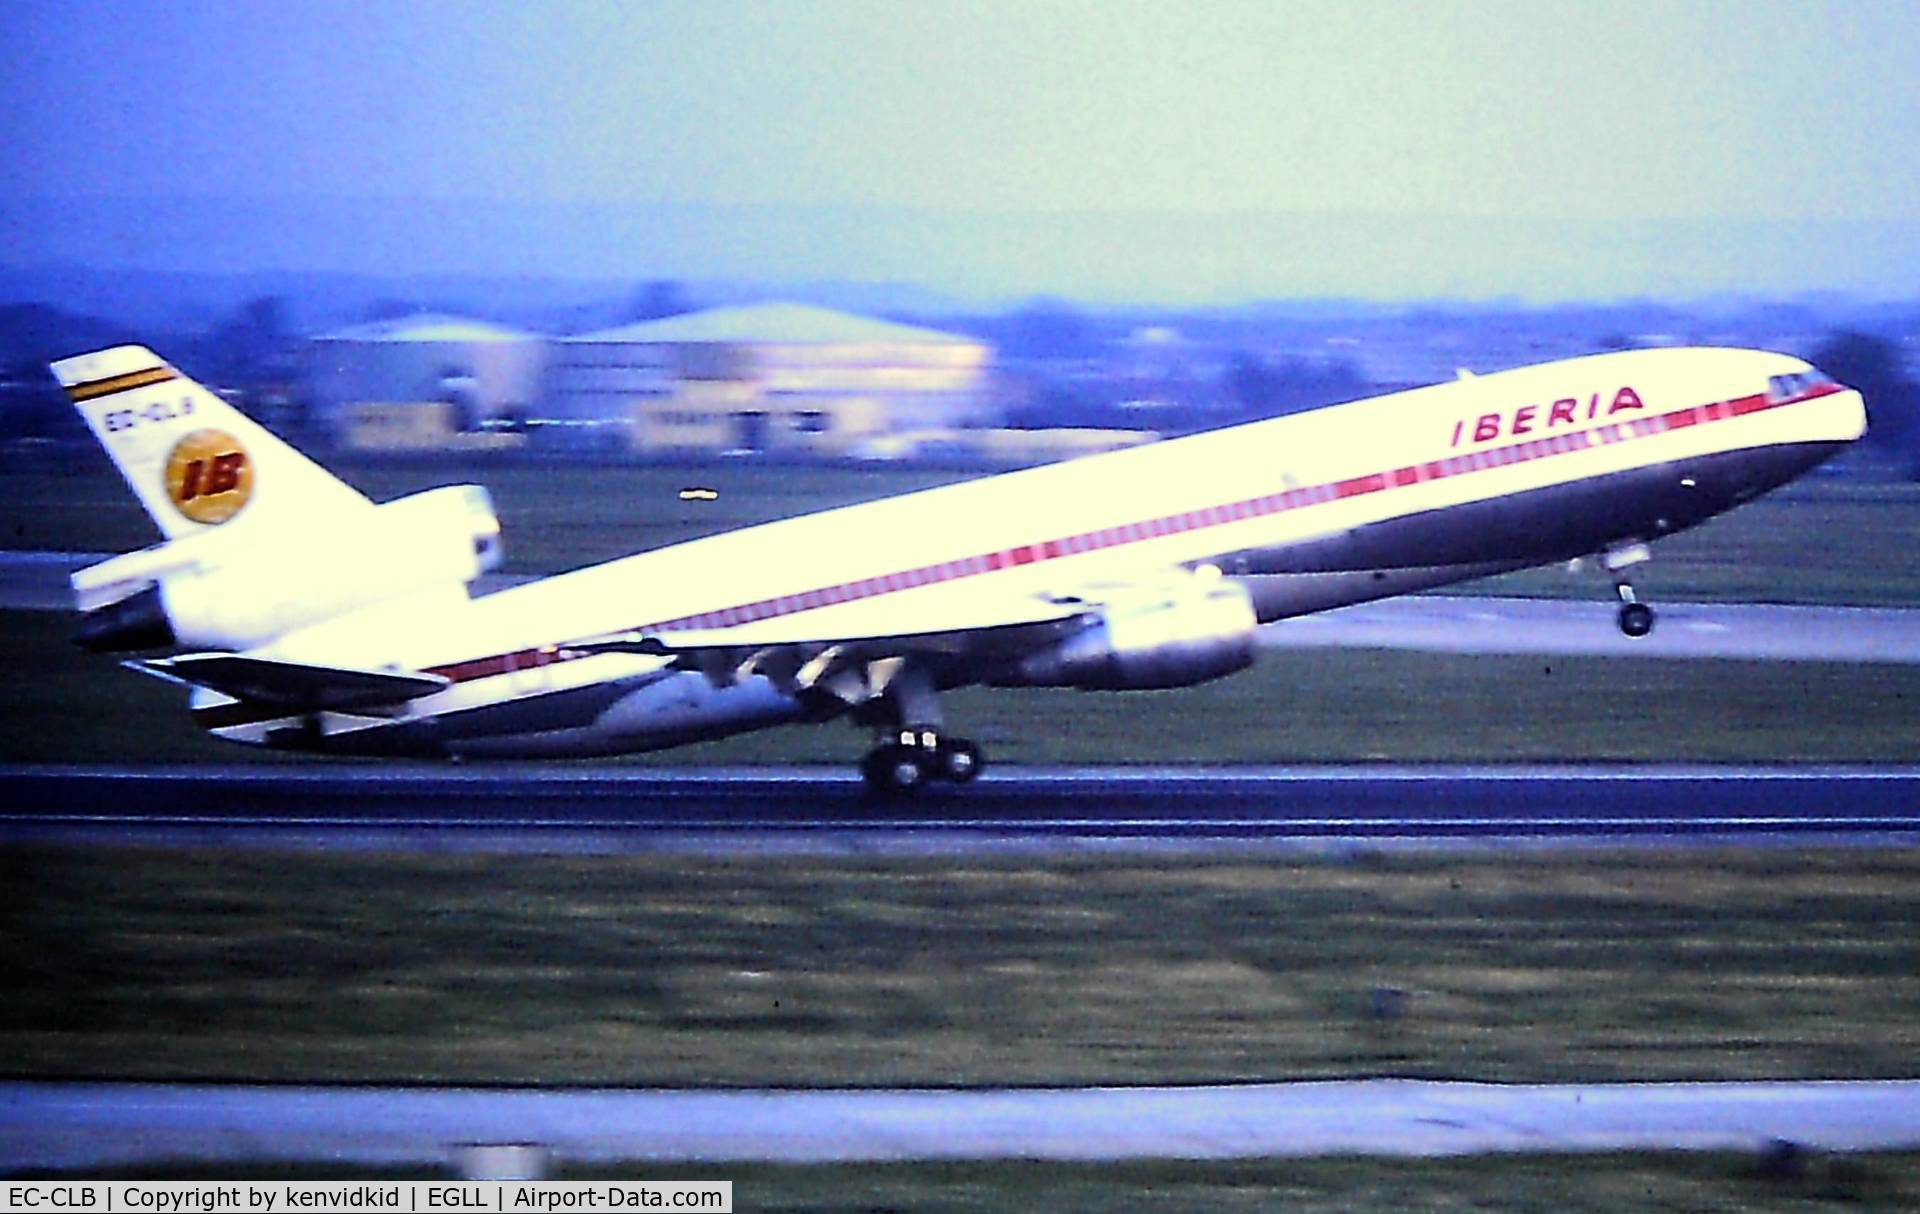 EC-CLB, 1974 McDonnell Douglas DC-10-30 C/N 47981, At Heathrow. Copied from slide.